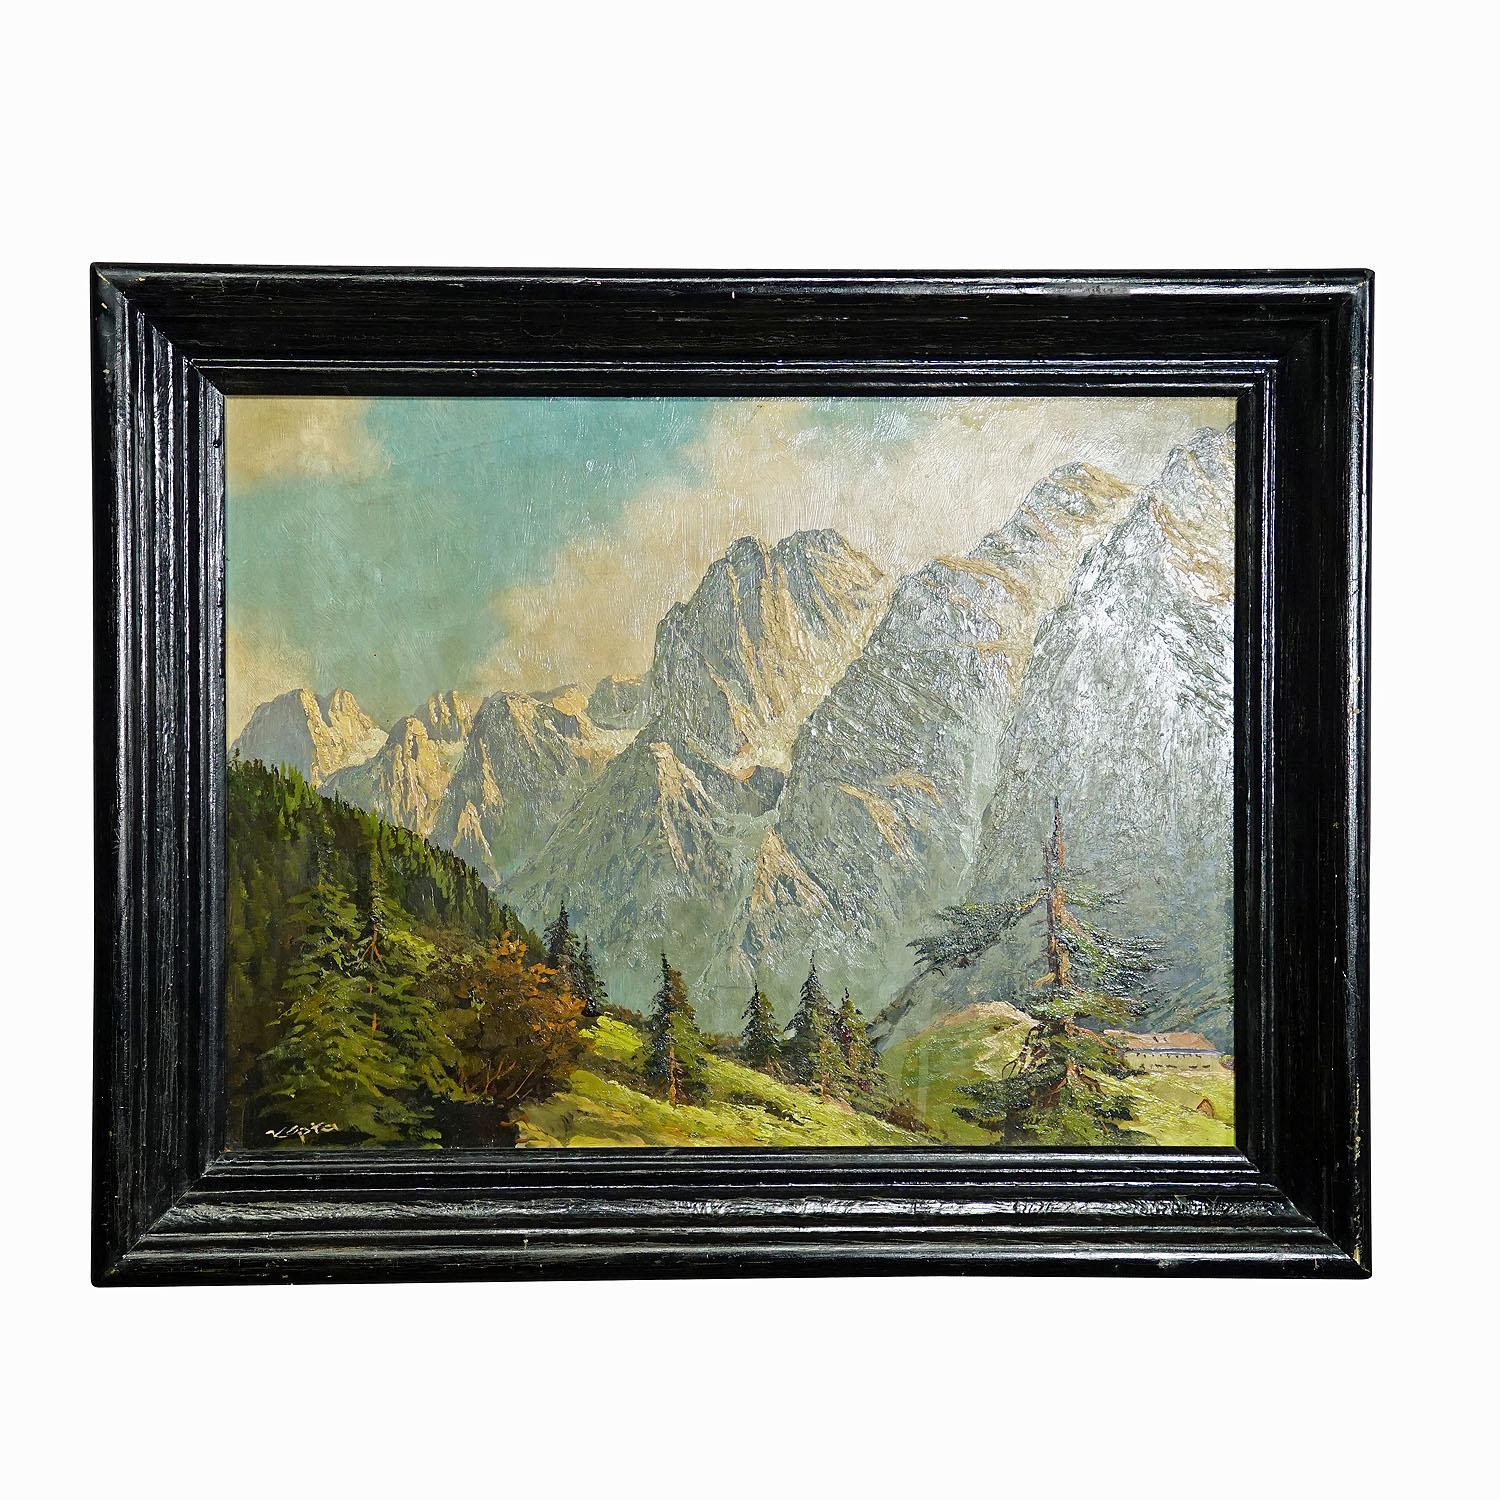 Summerly high mountain landscape, oil on board late 19th century.

An antique oil painting depicting a high mountain landscape with trees and cabin in front of a massif. Painted on board with pastell colors. Framed with antique black frame. On the